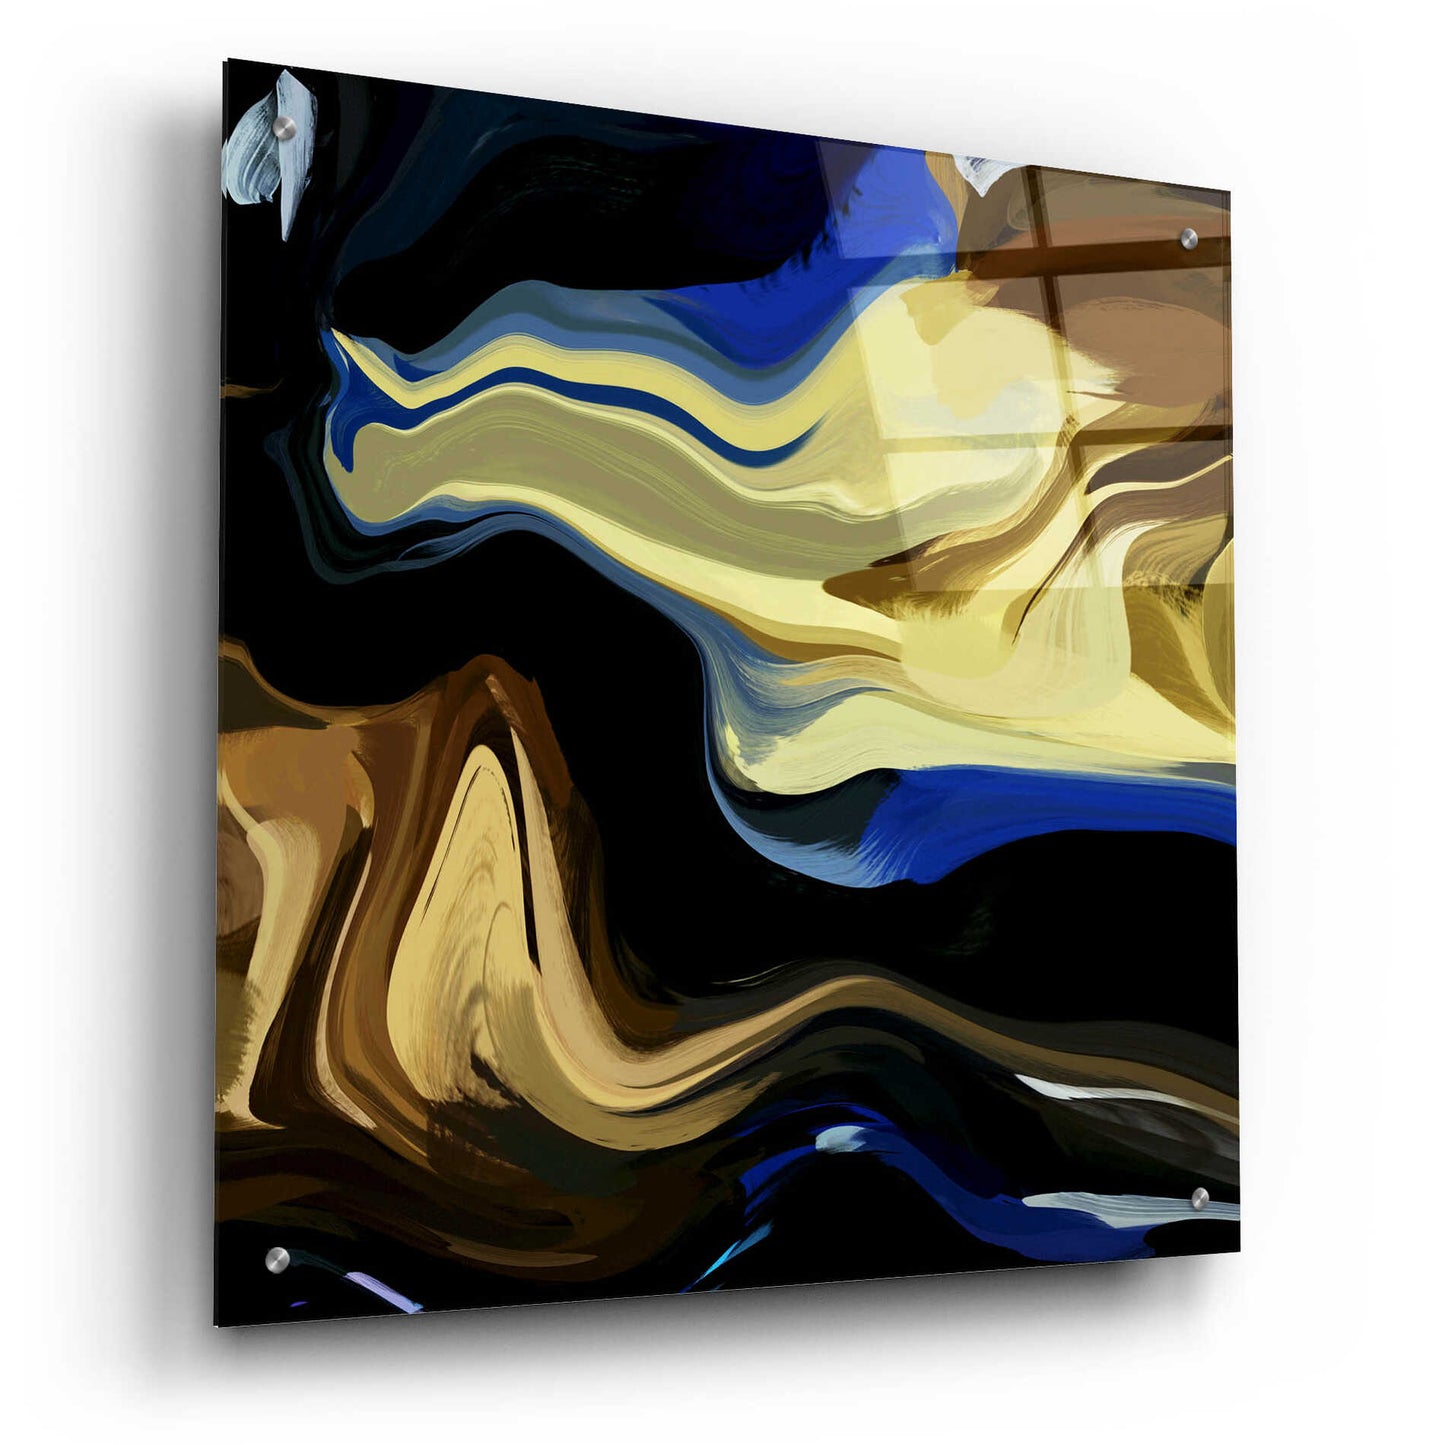 Epic Art 'Inverted Abstract Colorful Flows 16' by Irena Orlov Acrylic Glass Wall Art,24x24